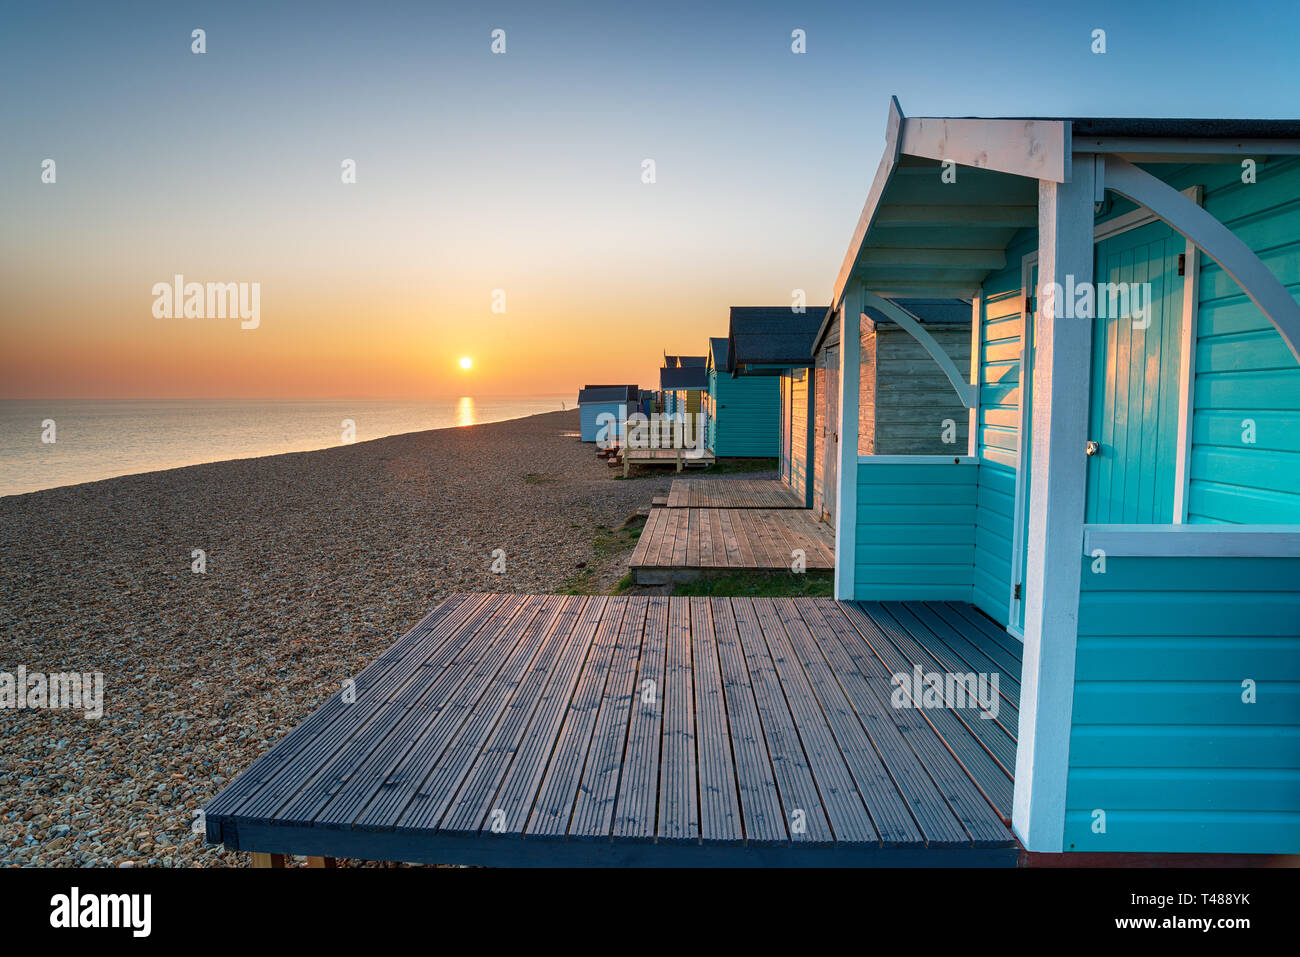 Sunset over beach huts at Milford on Sea in Hampshire Stock Photo